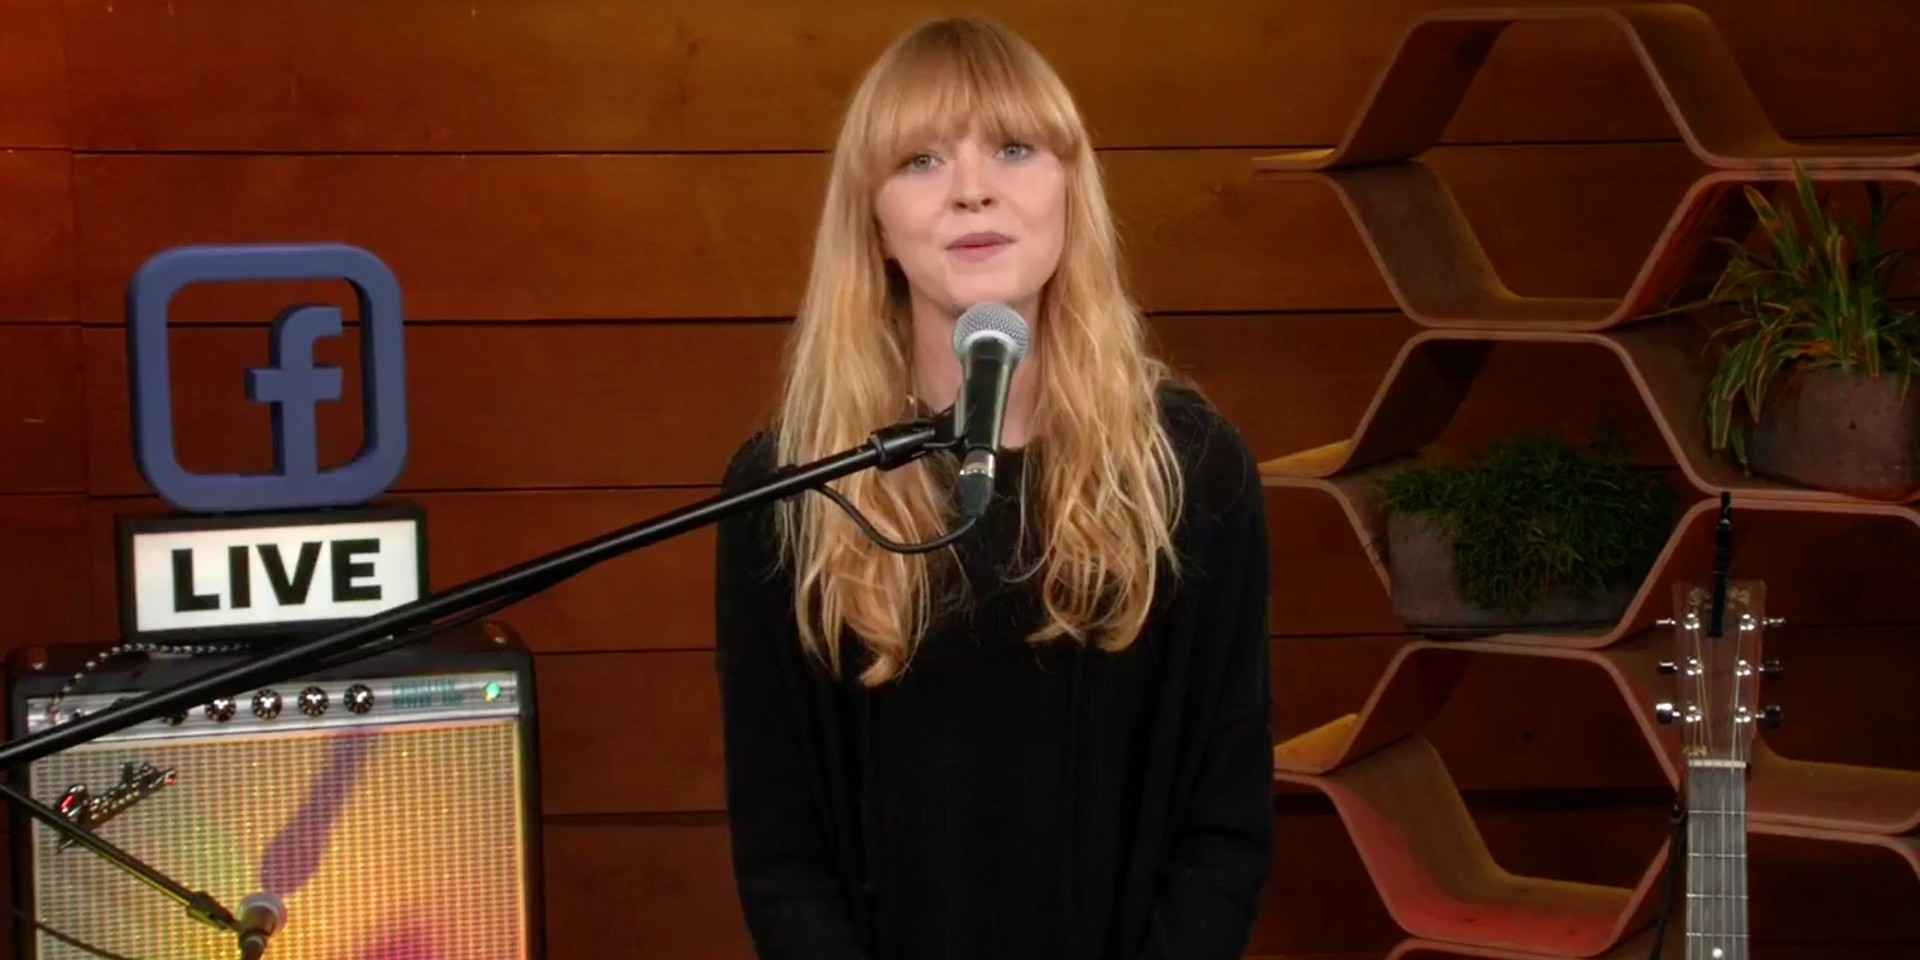 Lucy Rose answers fan questions and performs new tracks in Facebook live session – watch